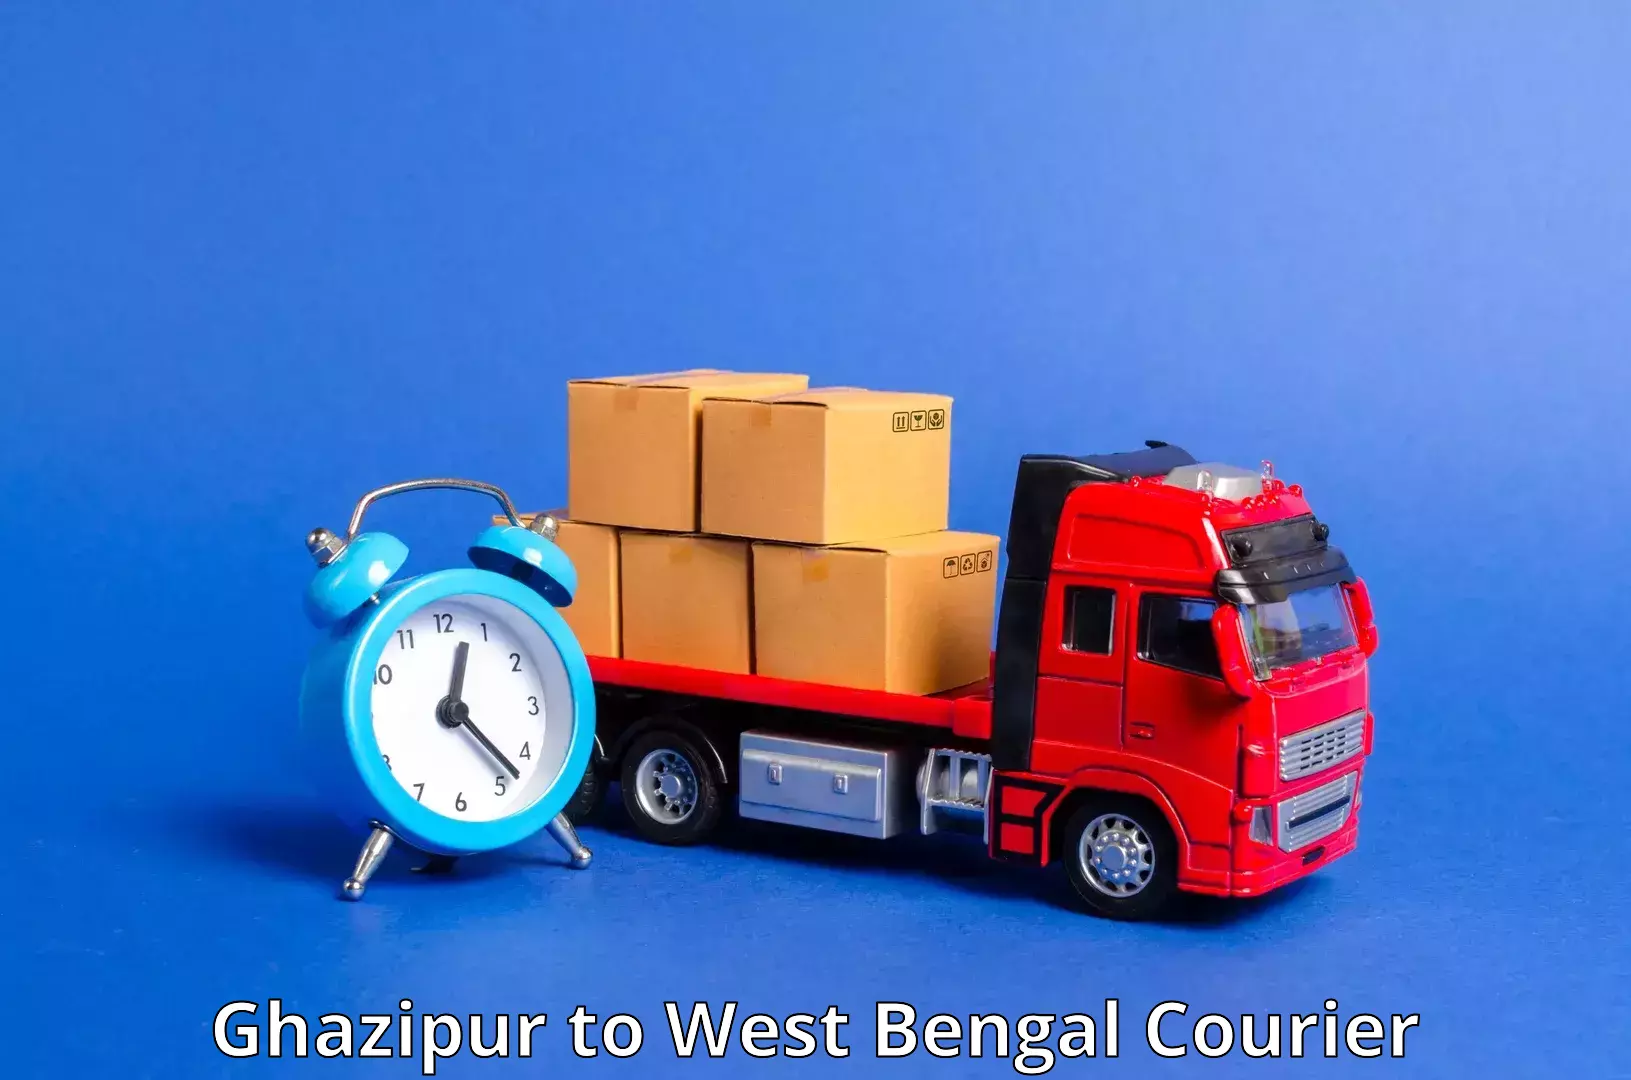 Cash on delivery service Ghazipur to Kaliachak